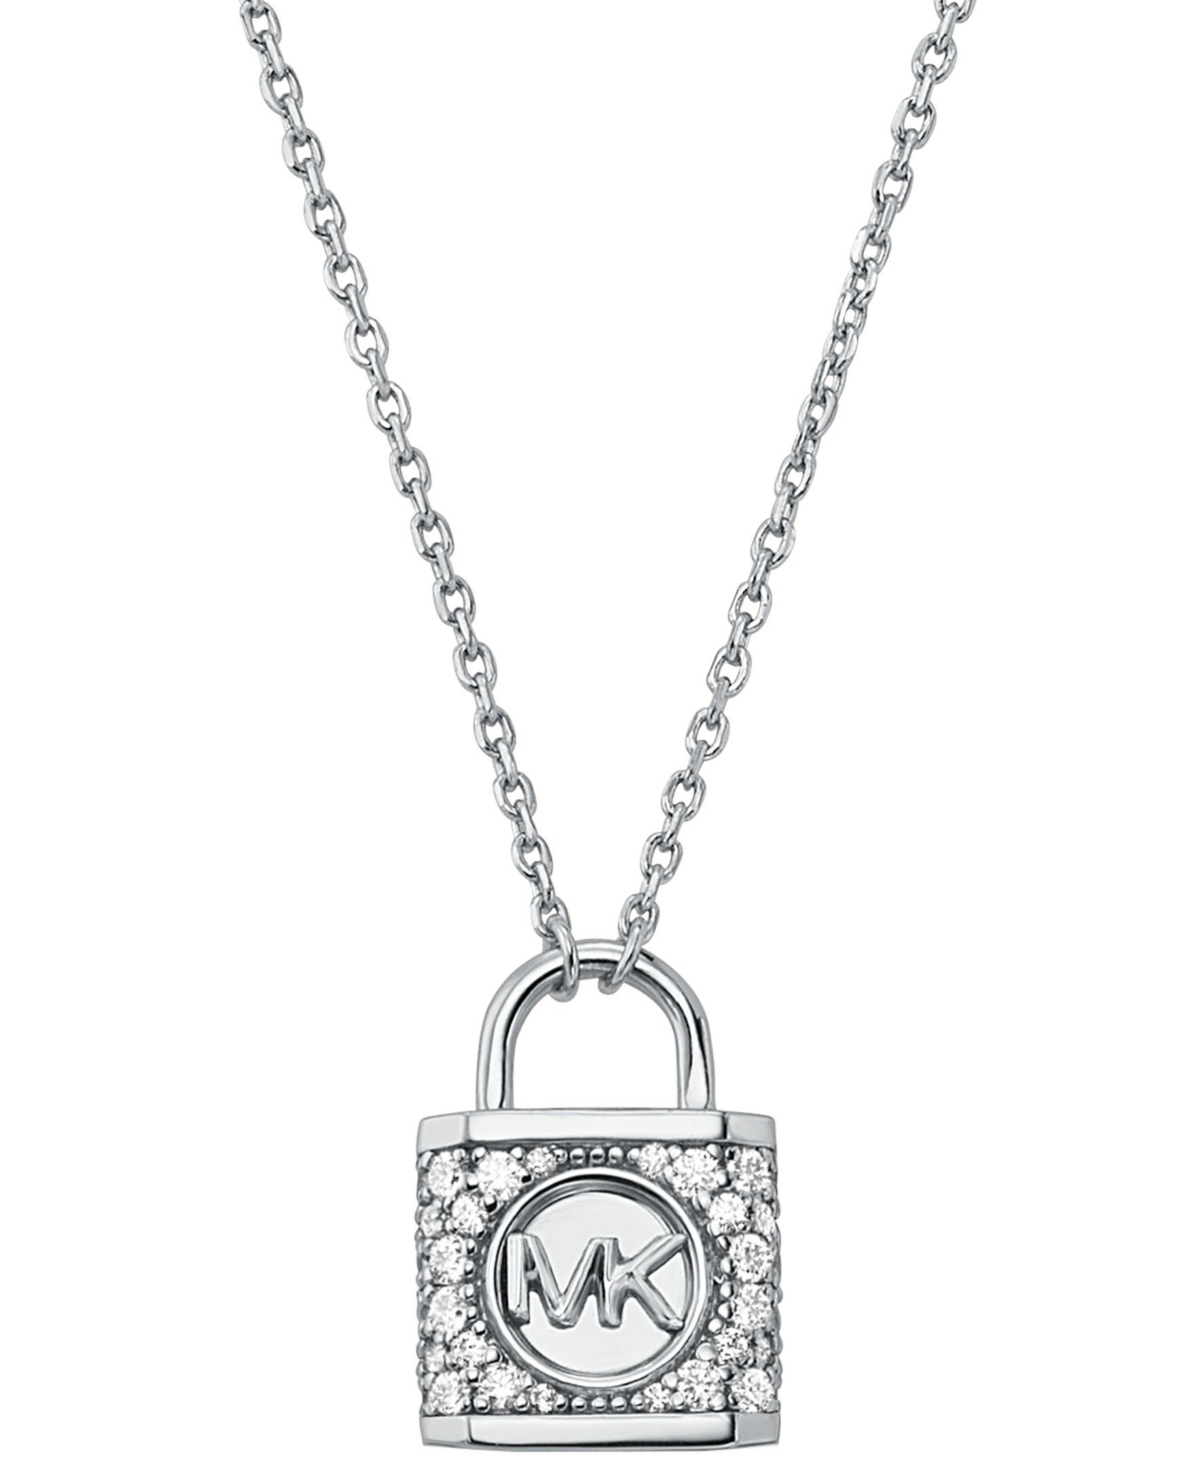 Michael Kors Pave Lock Pendant Necklace In Silver